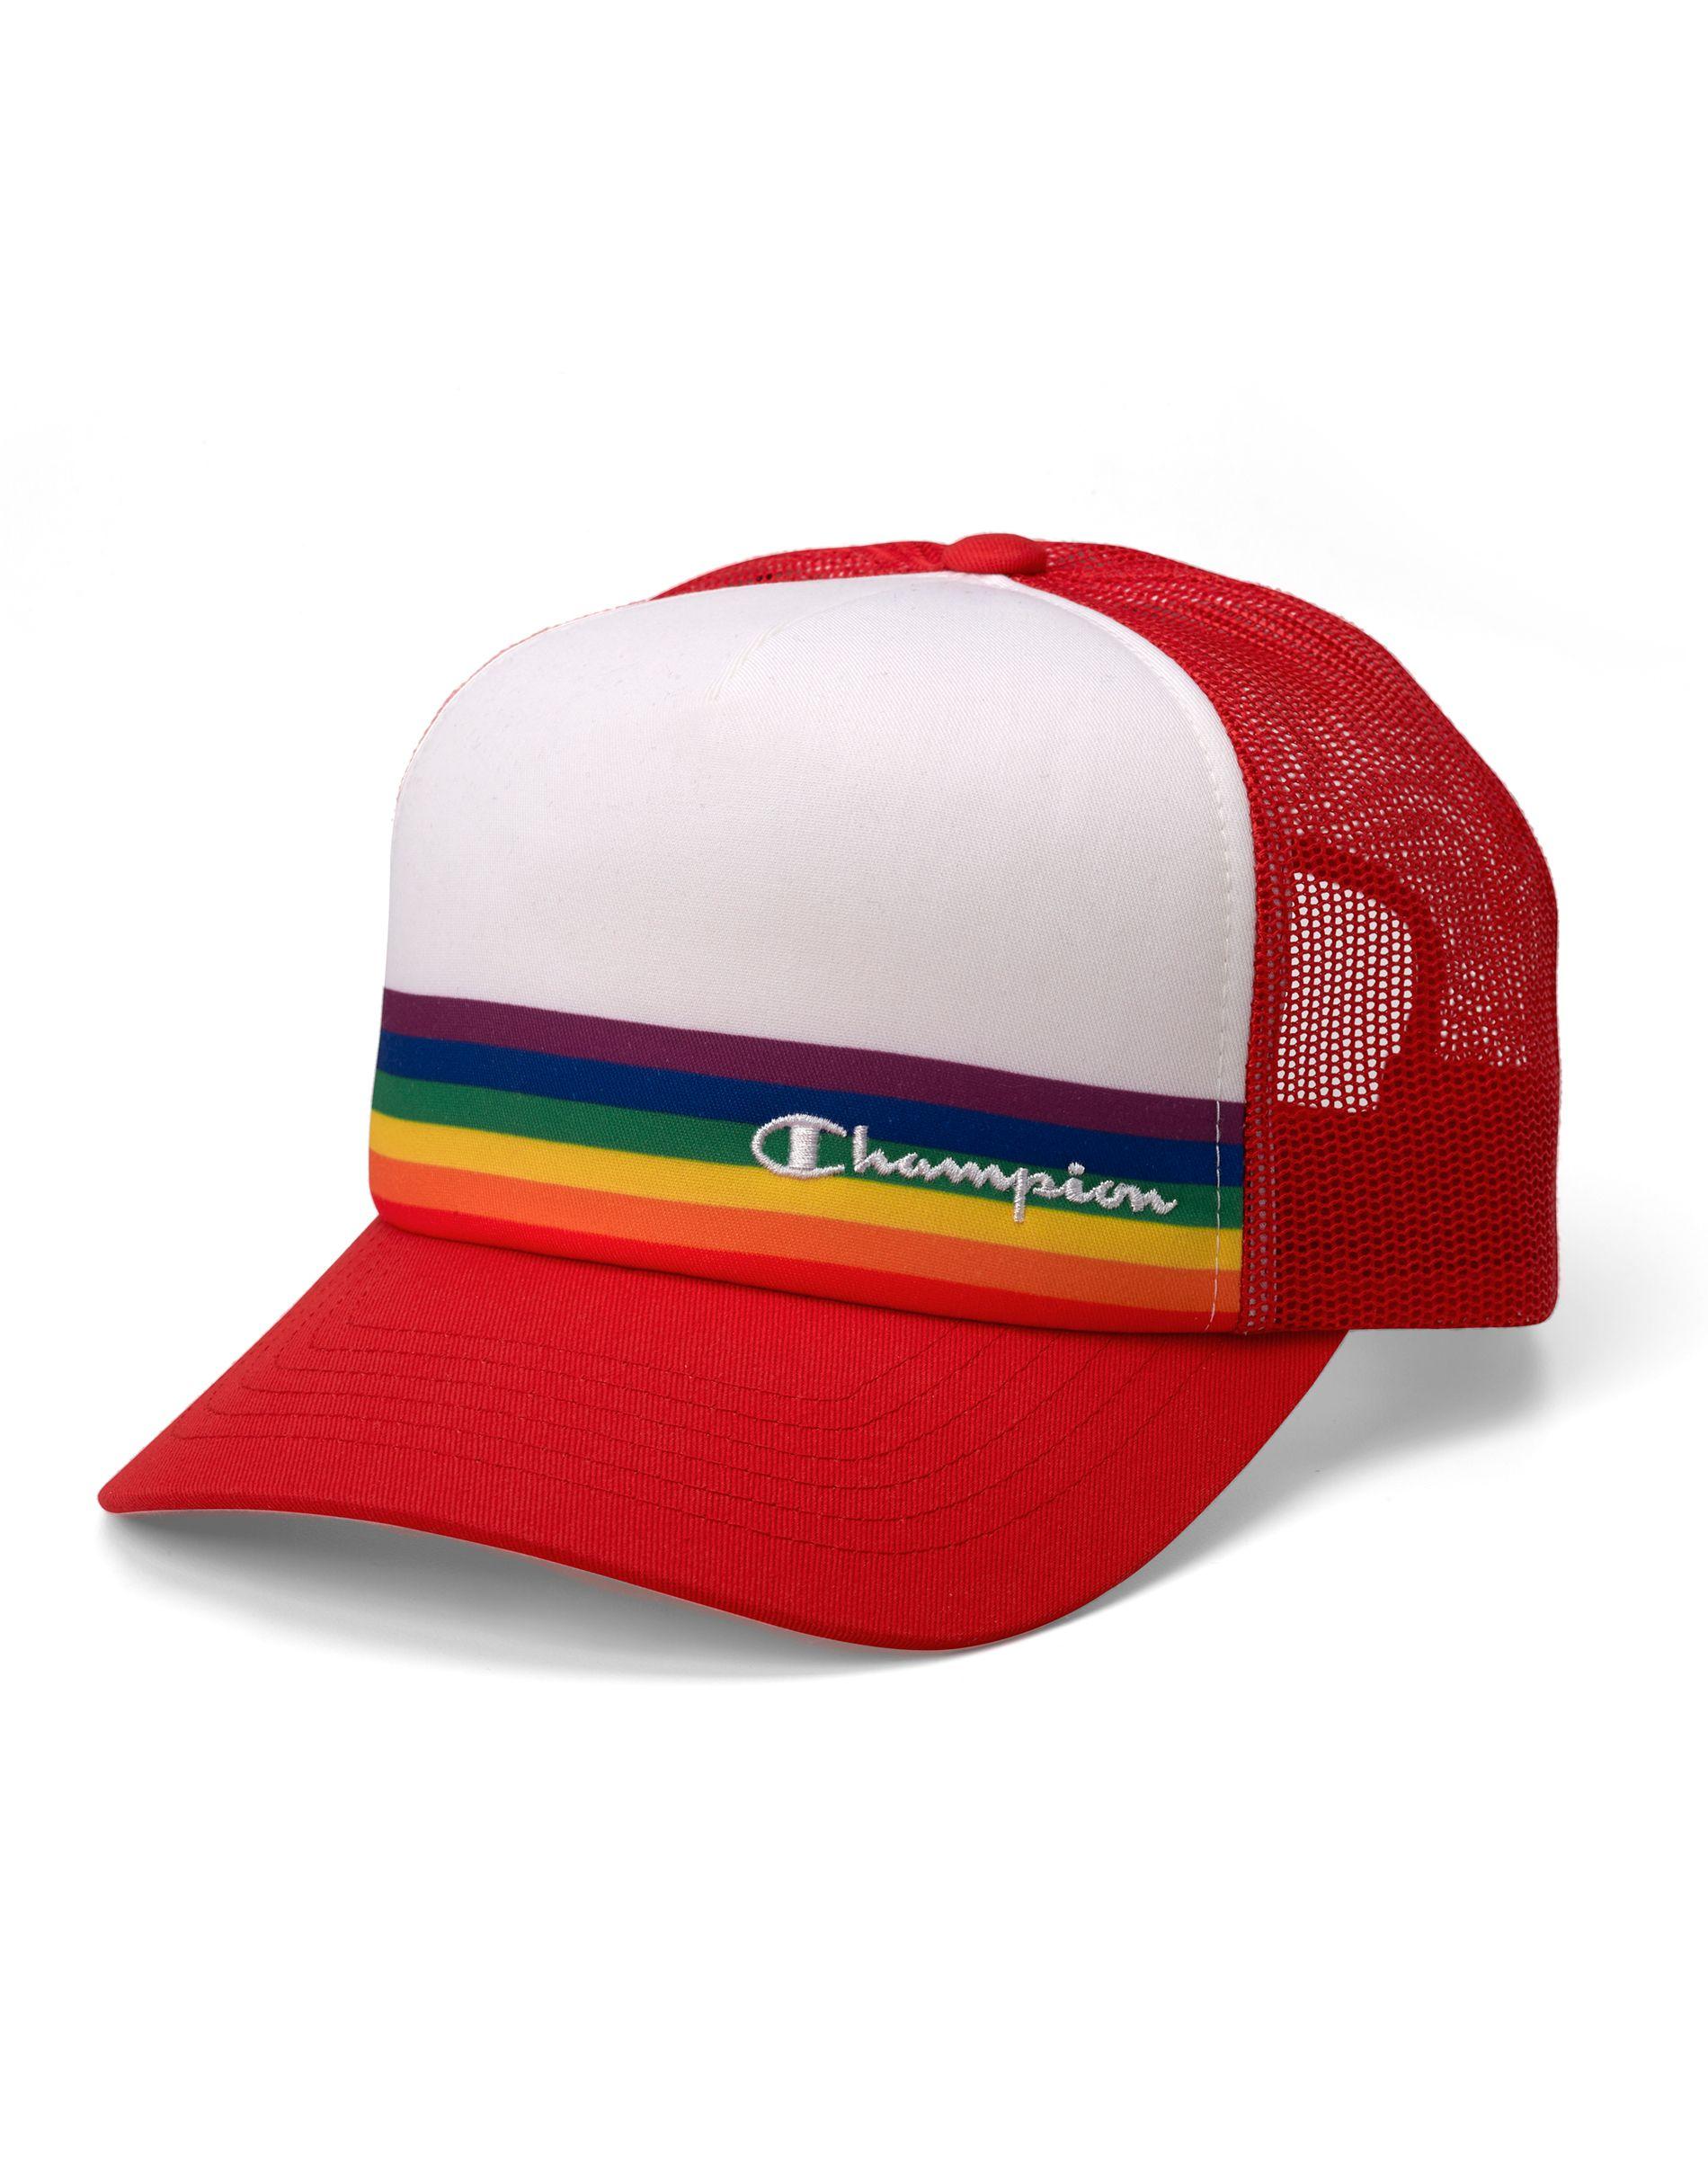 Champion Synthetic Exclusive Pride Trucker Hat in Scarlet (Red) -